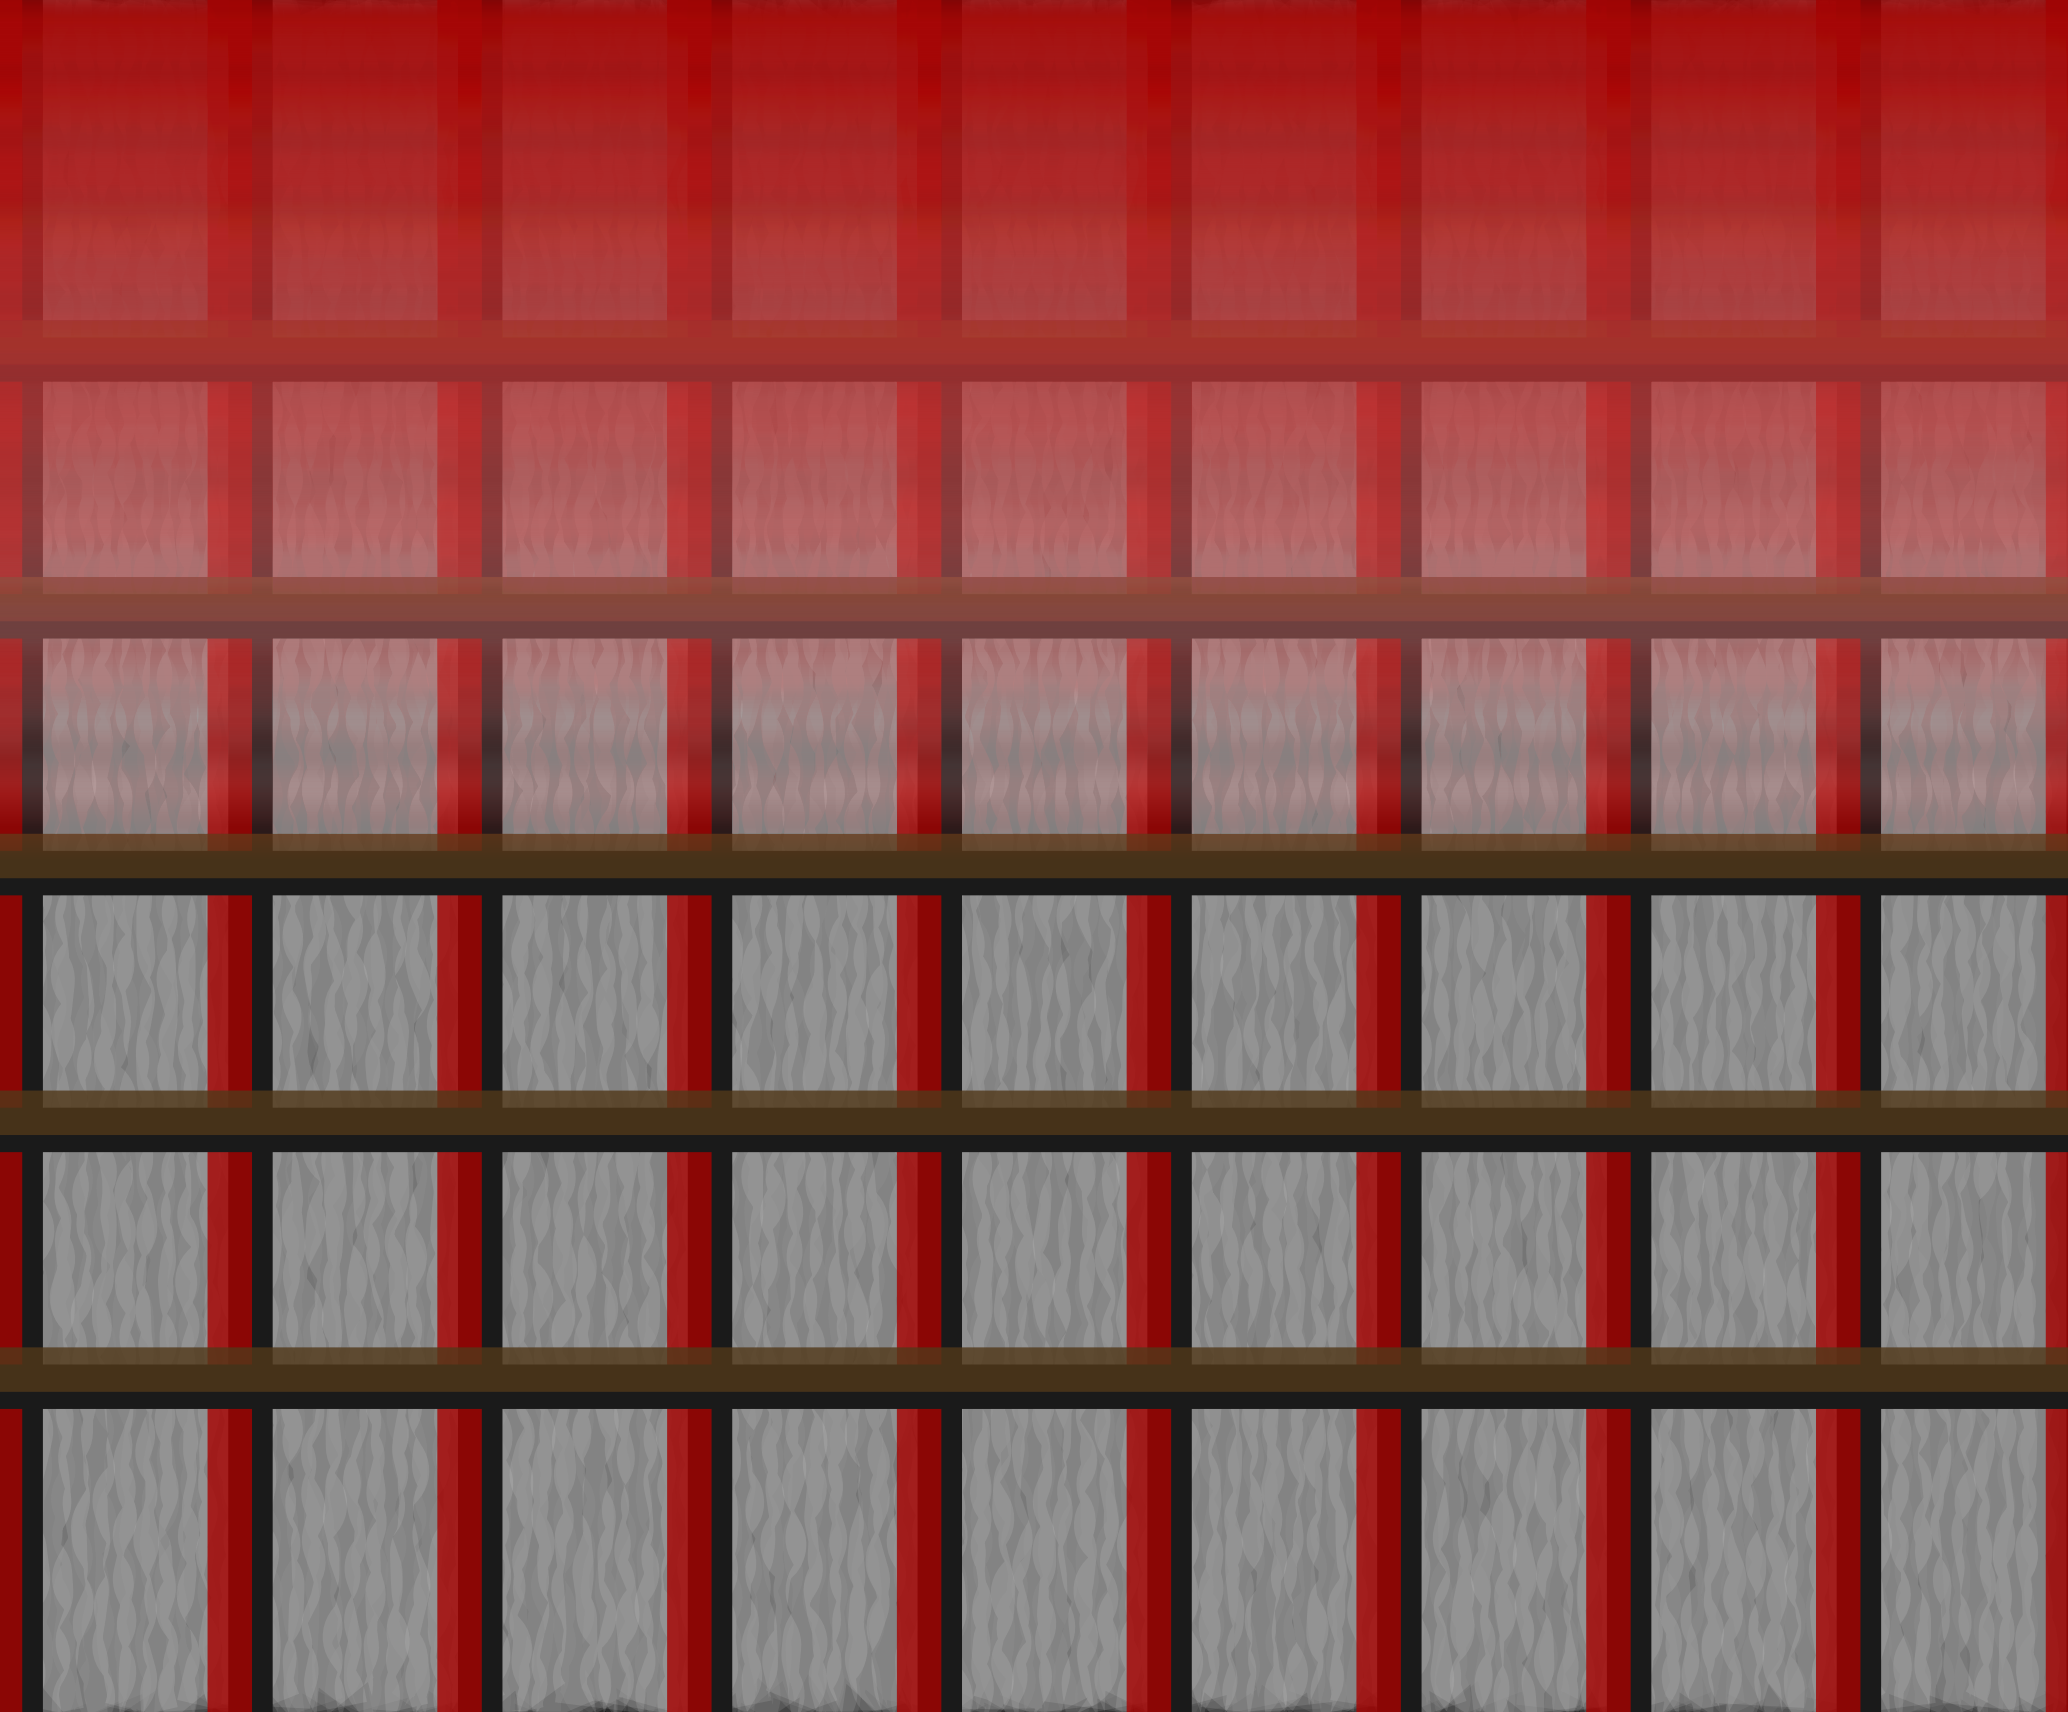 A grid pattern of thick vertical red and black lines and thick horizontal brown and black lines. The background has a gray wavy pattern. The top of the image has a hazy red fog that lightens up and vanishes before it reahces the middle of the image.